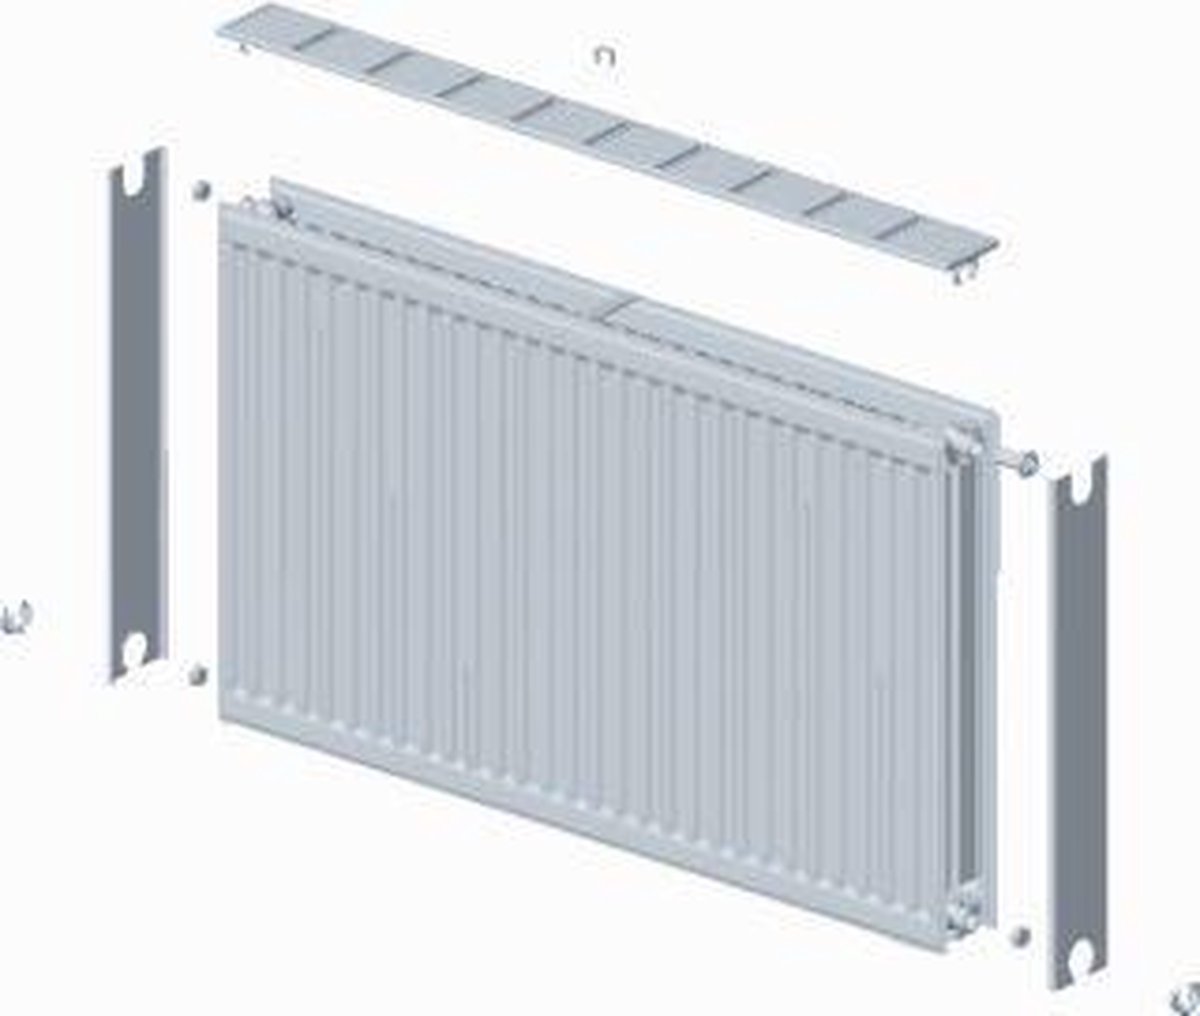 Stelrad paneelradiator Novello, staal, wit, (hxlxd) 500x1000x100mm, 22